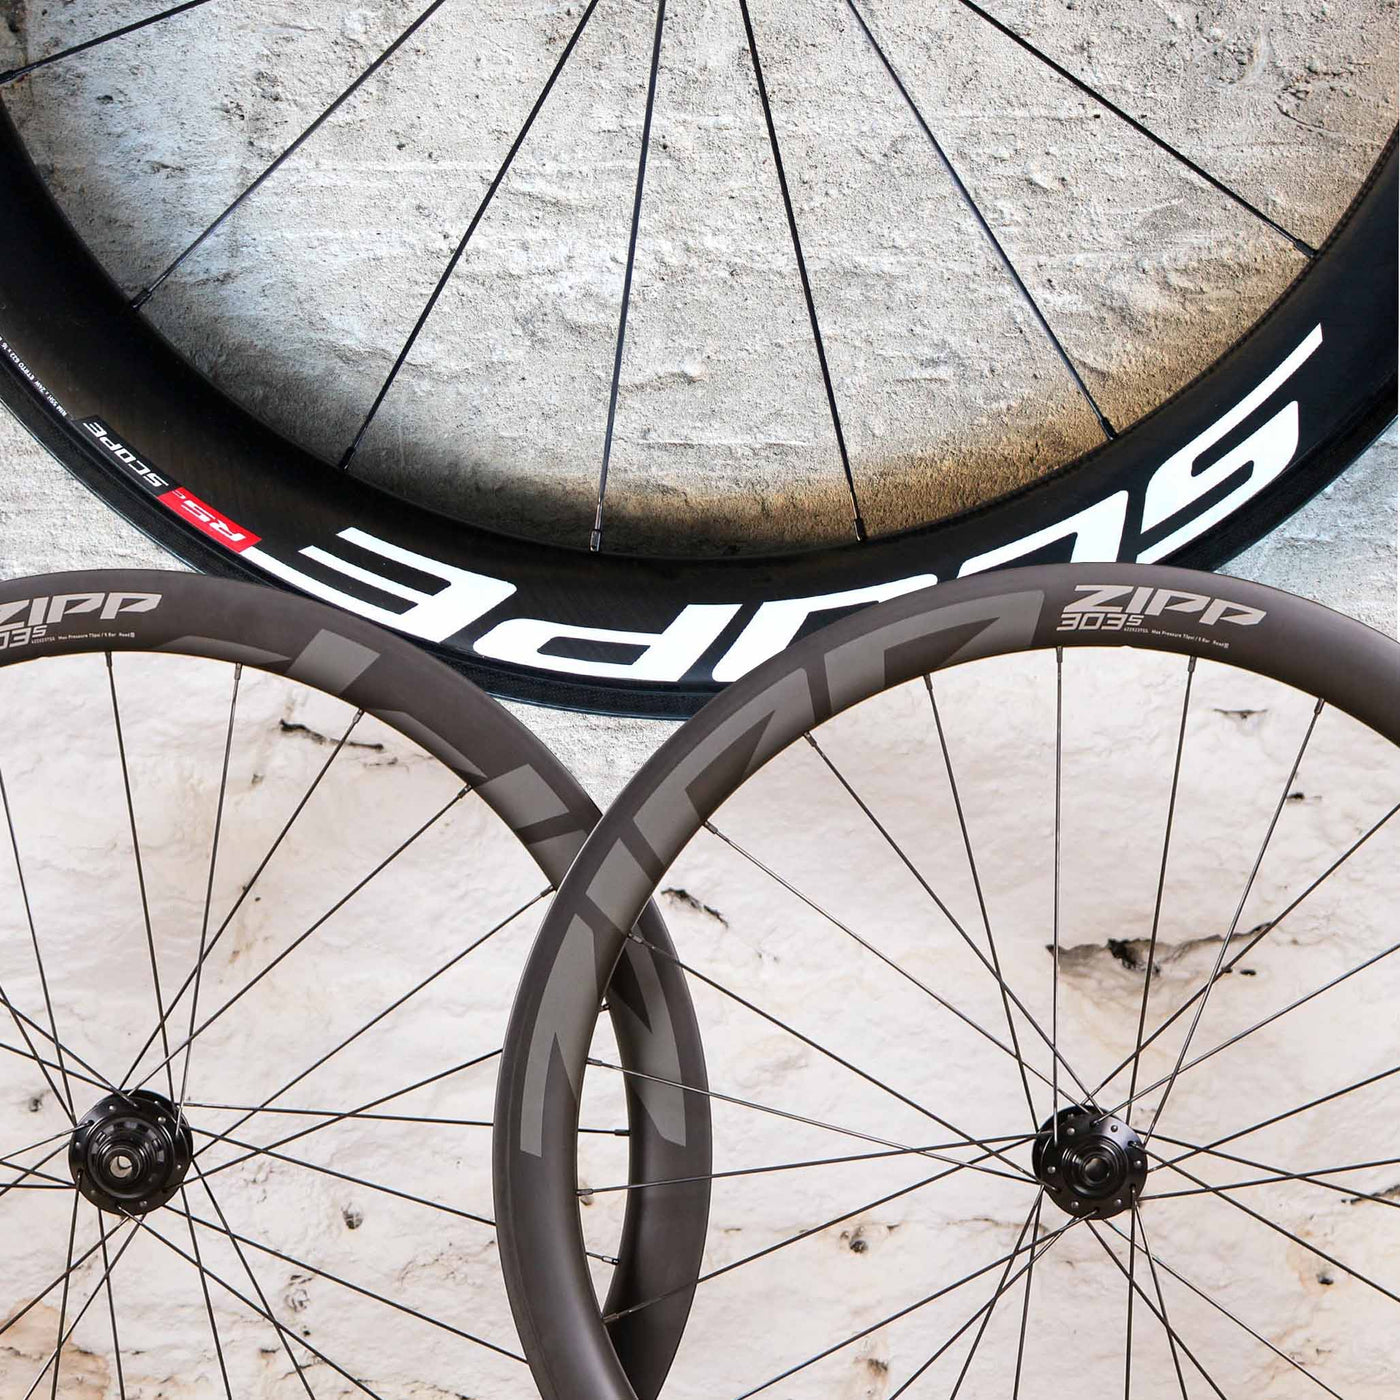 Carbon Fibre road bike wheelsets in disc brake from Scope Zipp Corima Fulkrum Vittoria in rim brake. lightweight options stiff and fast shallow and aero profiles, available at Nerang Gold Coast delivery Australia wide. 